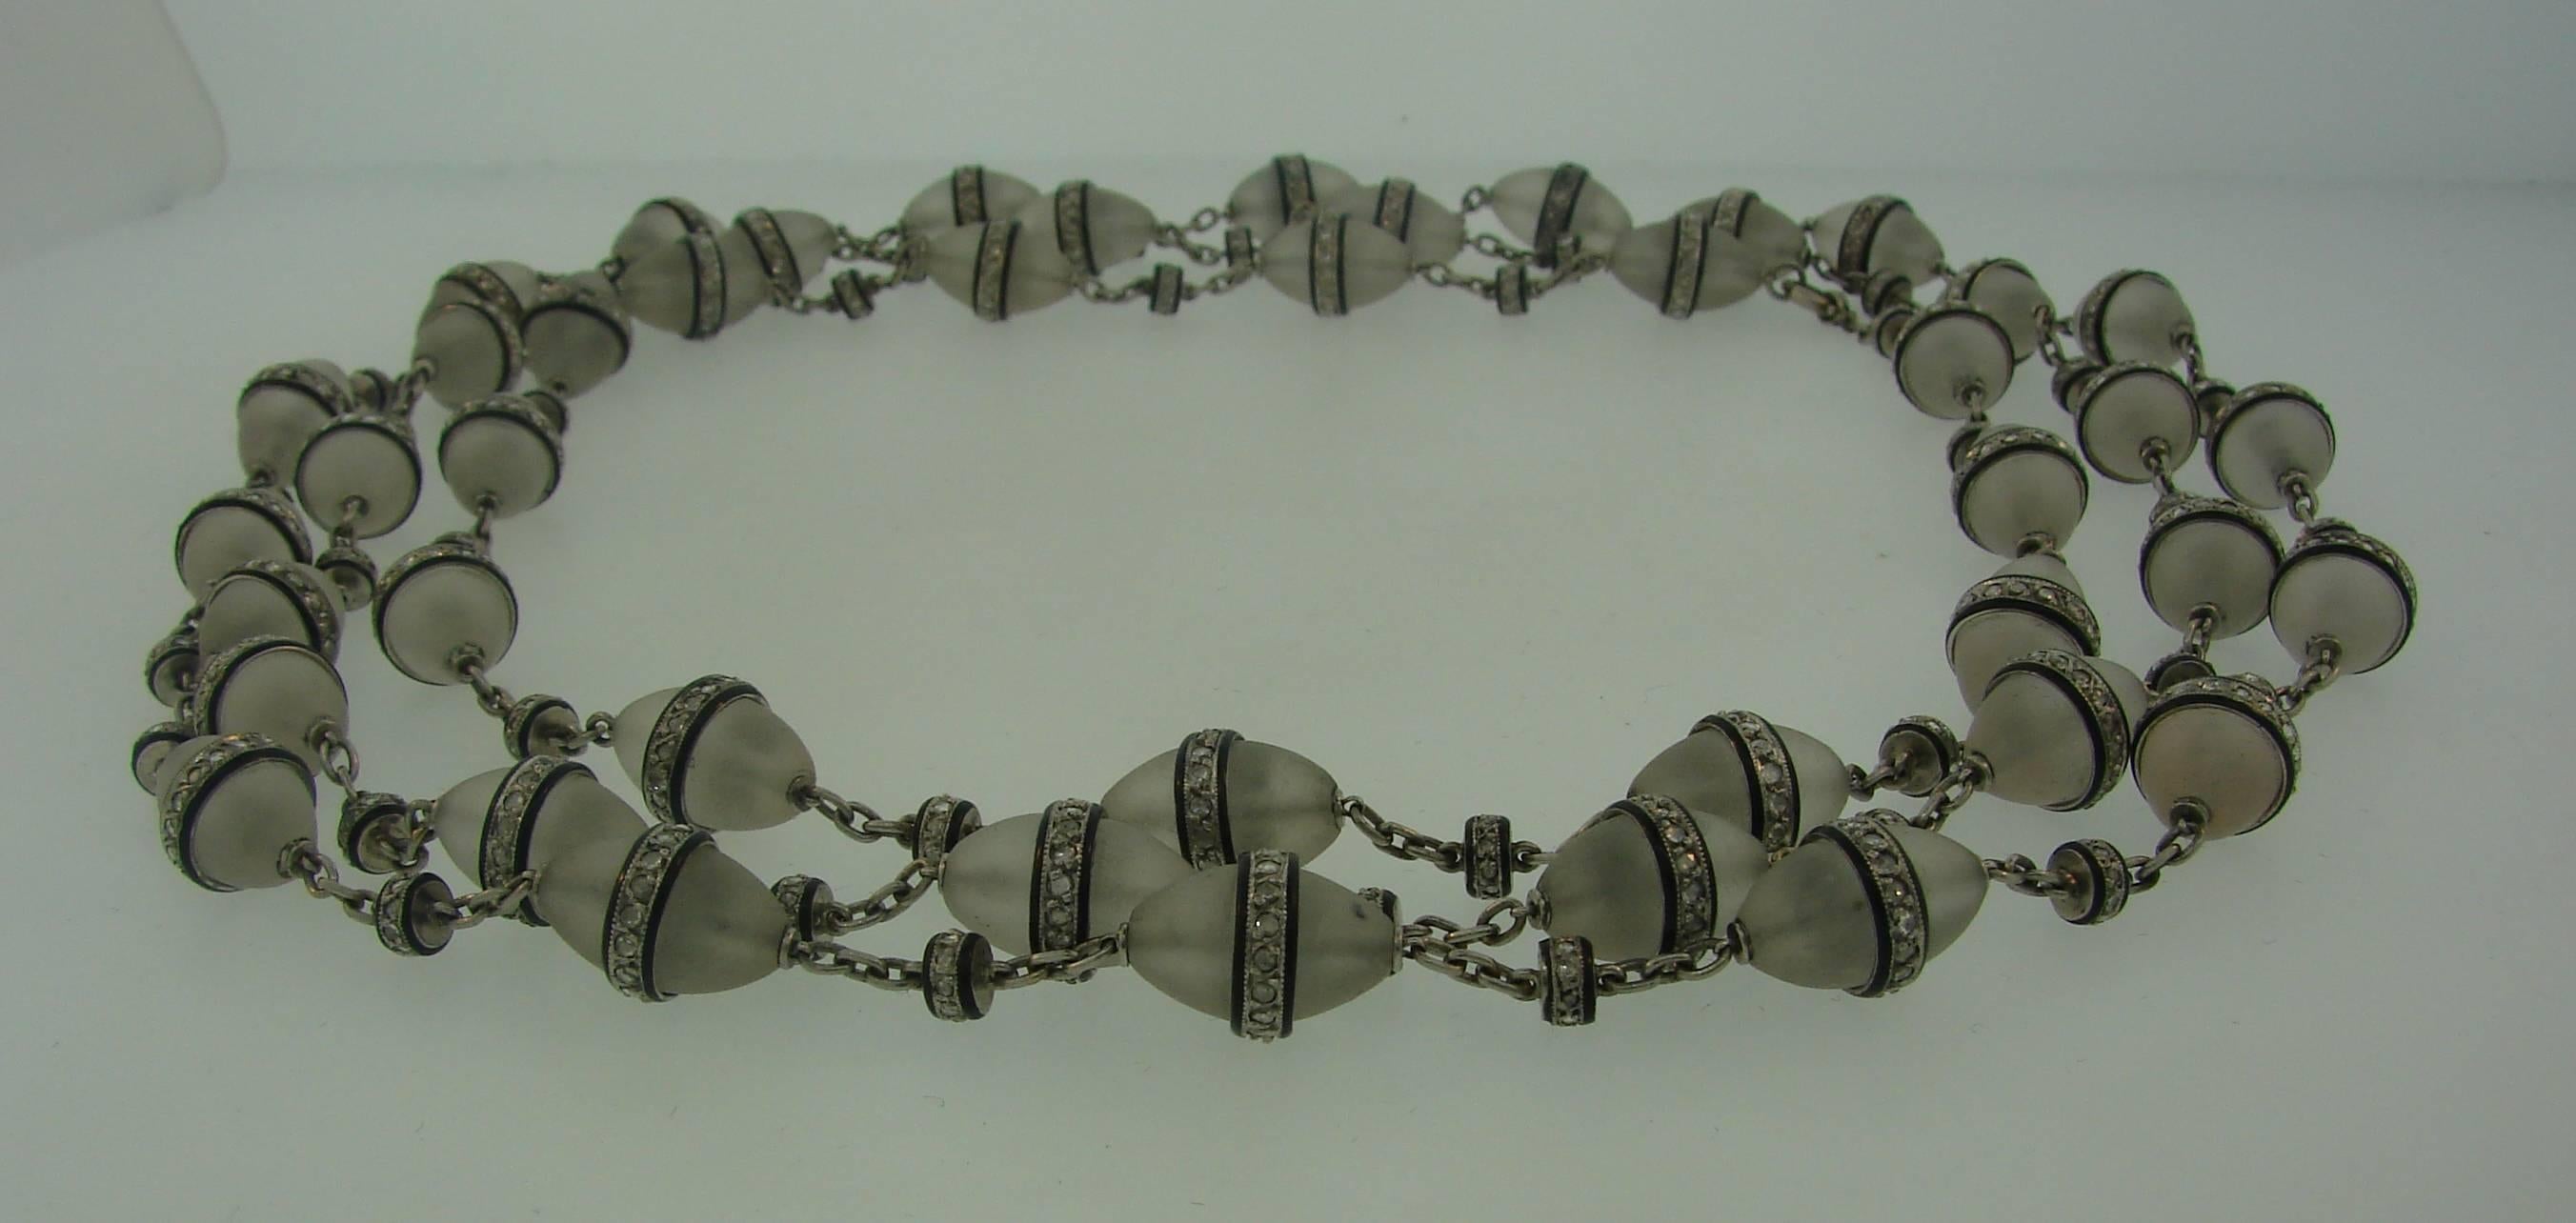 Lovely Edwardian bead necklace created in the 1910's. made of  rock crystal beads accented with black enamel and rose cut diamonds. Elegant, feminine and wearable, it is a great addition to your jewelry collection. 
The necklace is 51 inches long